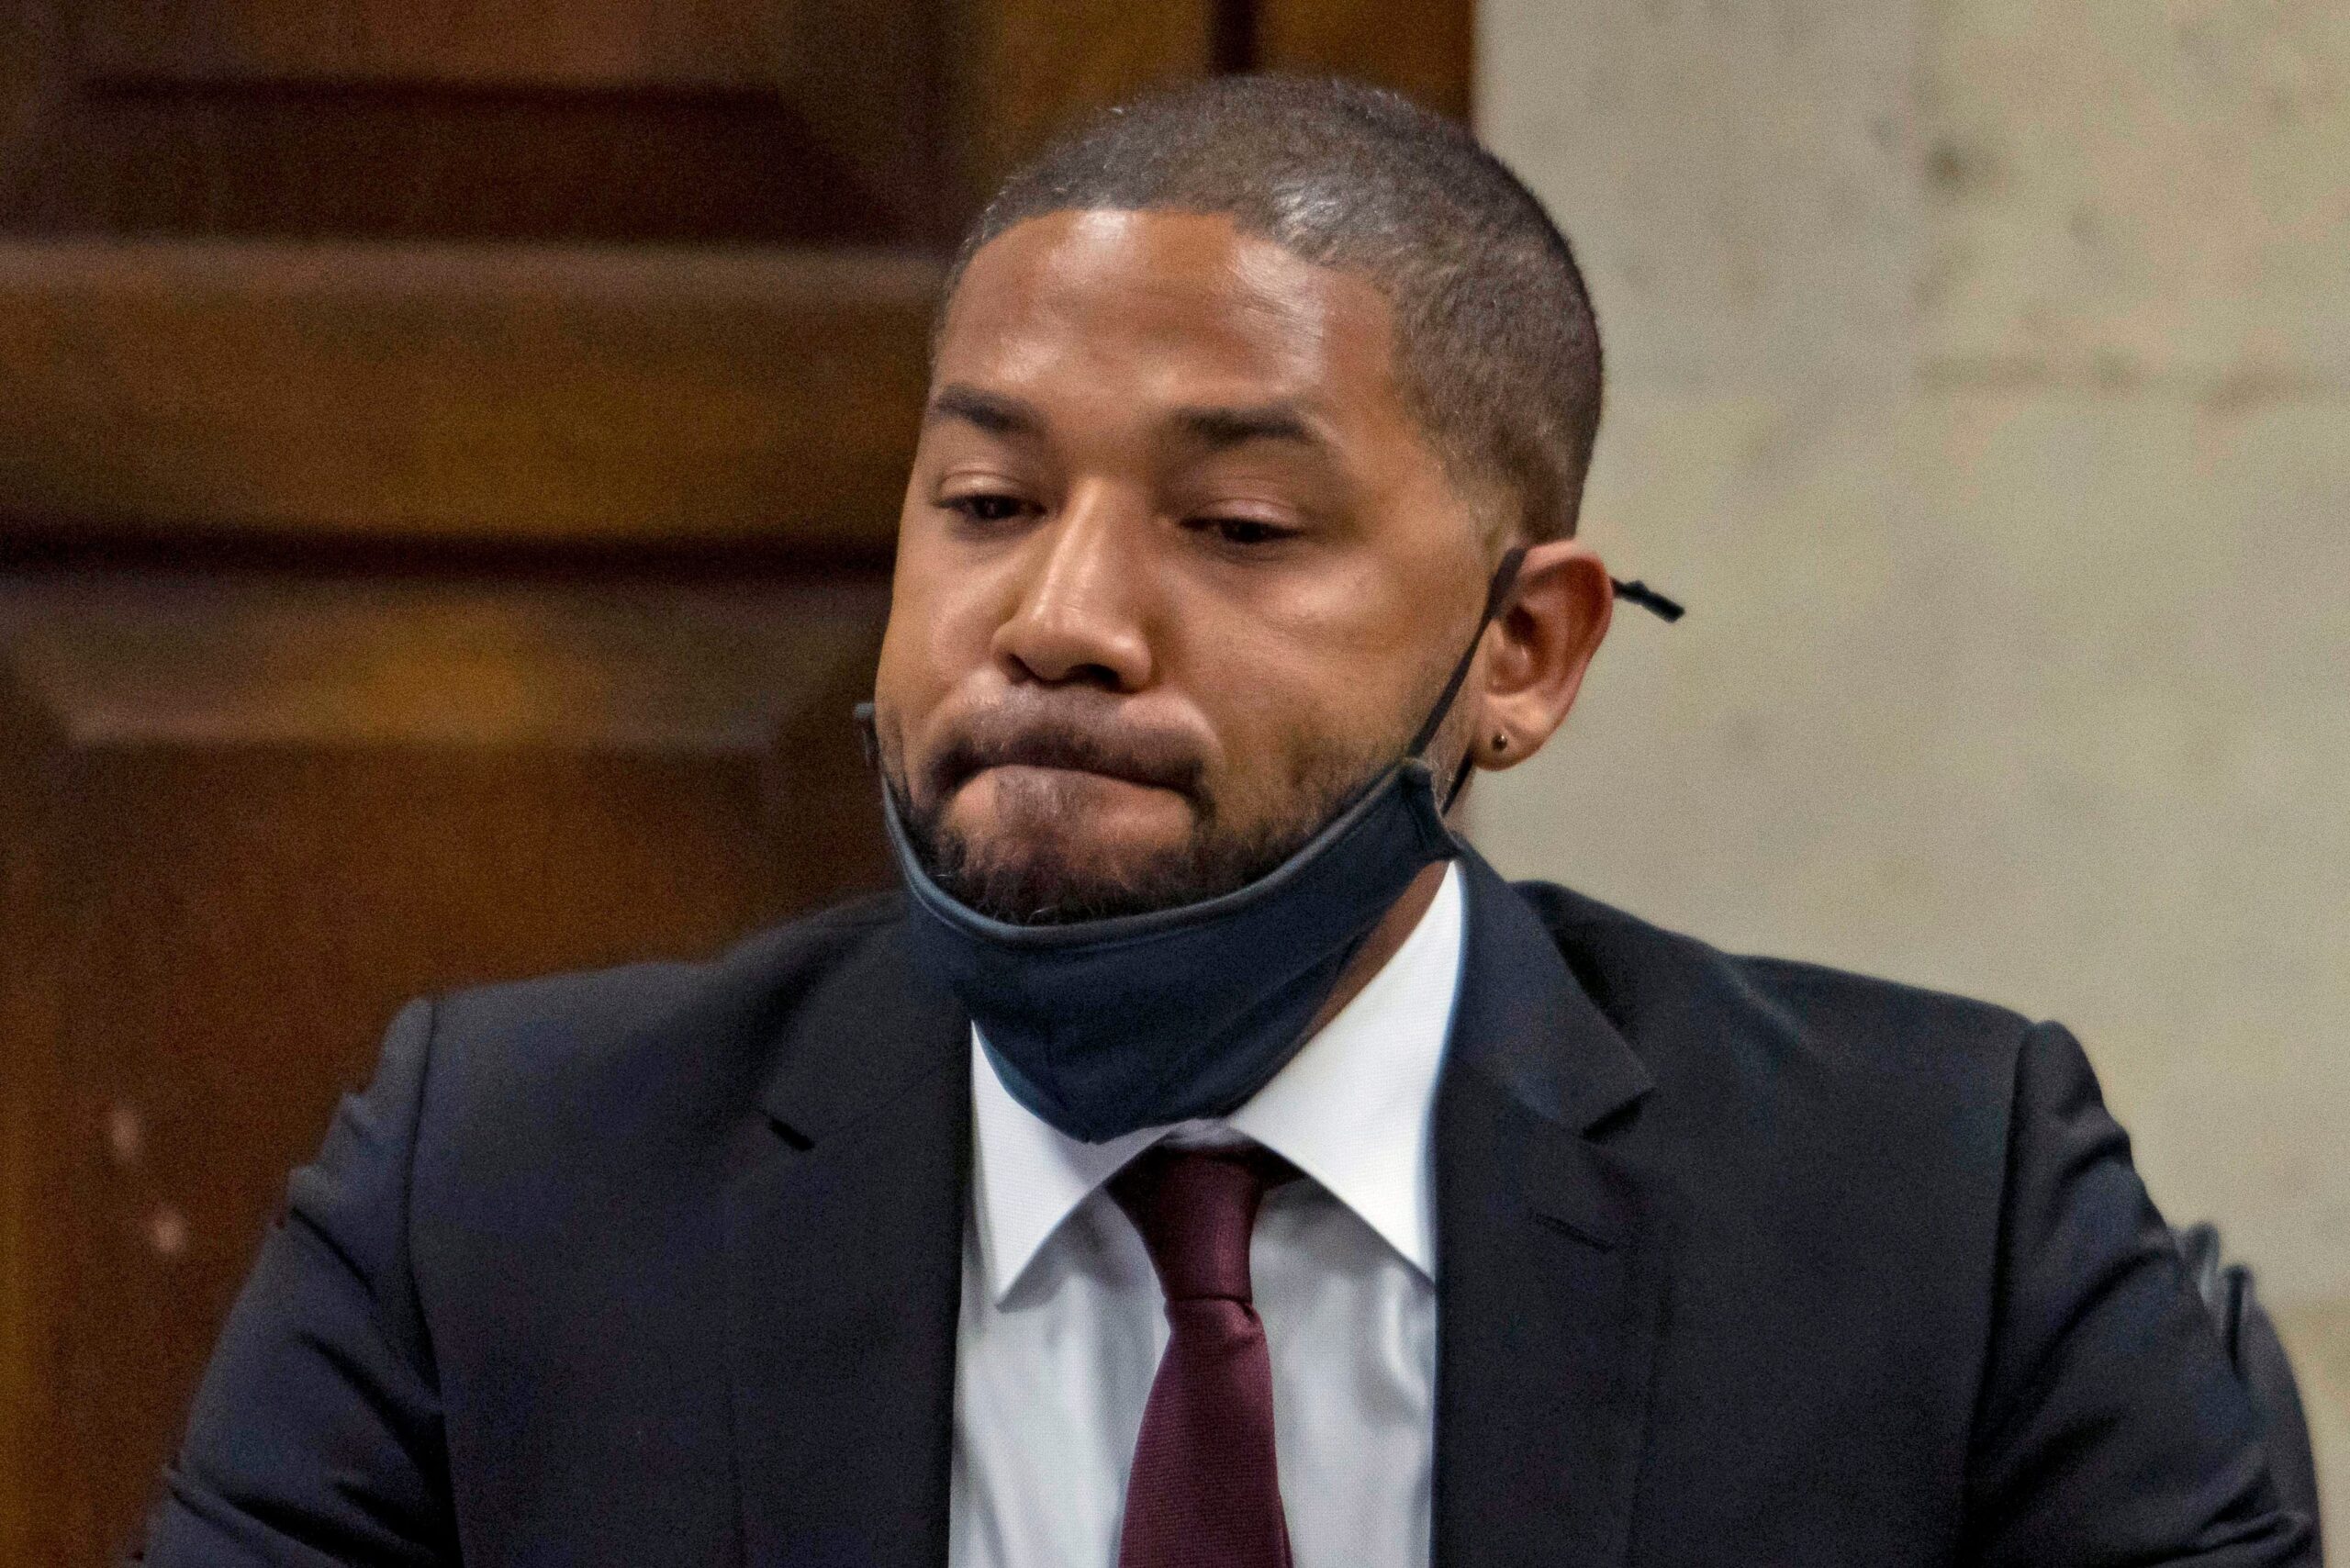 Illinois Supreme Court to hear actor Jussie Smollett appeal of conviction for staging racist attack